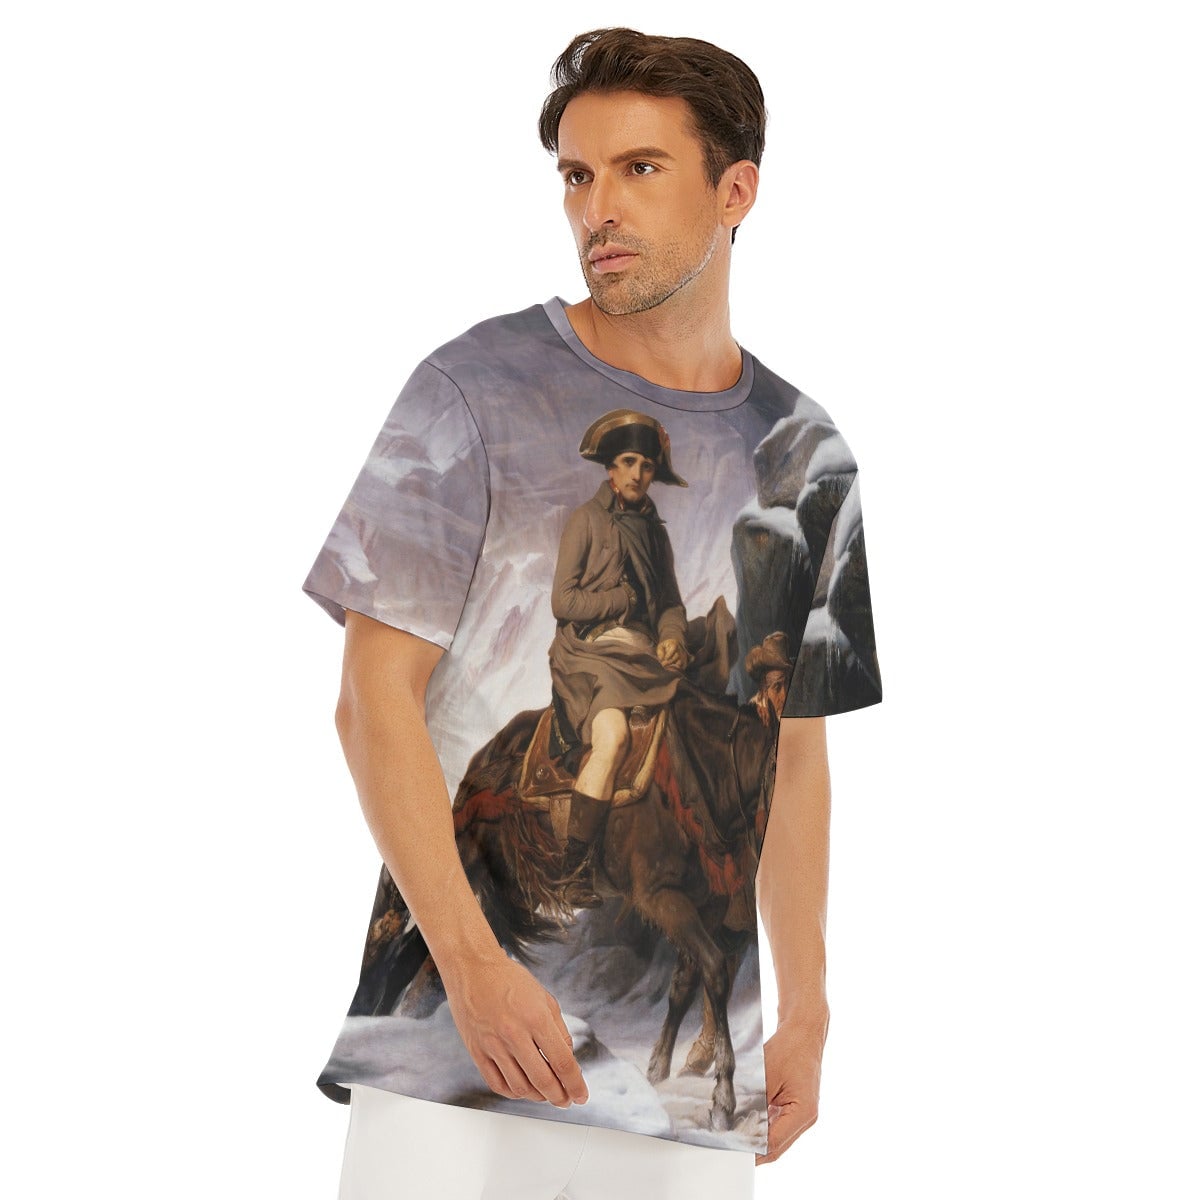 Napoleon on a mule with a peasant leading him T-Shirt